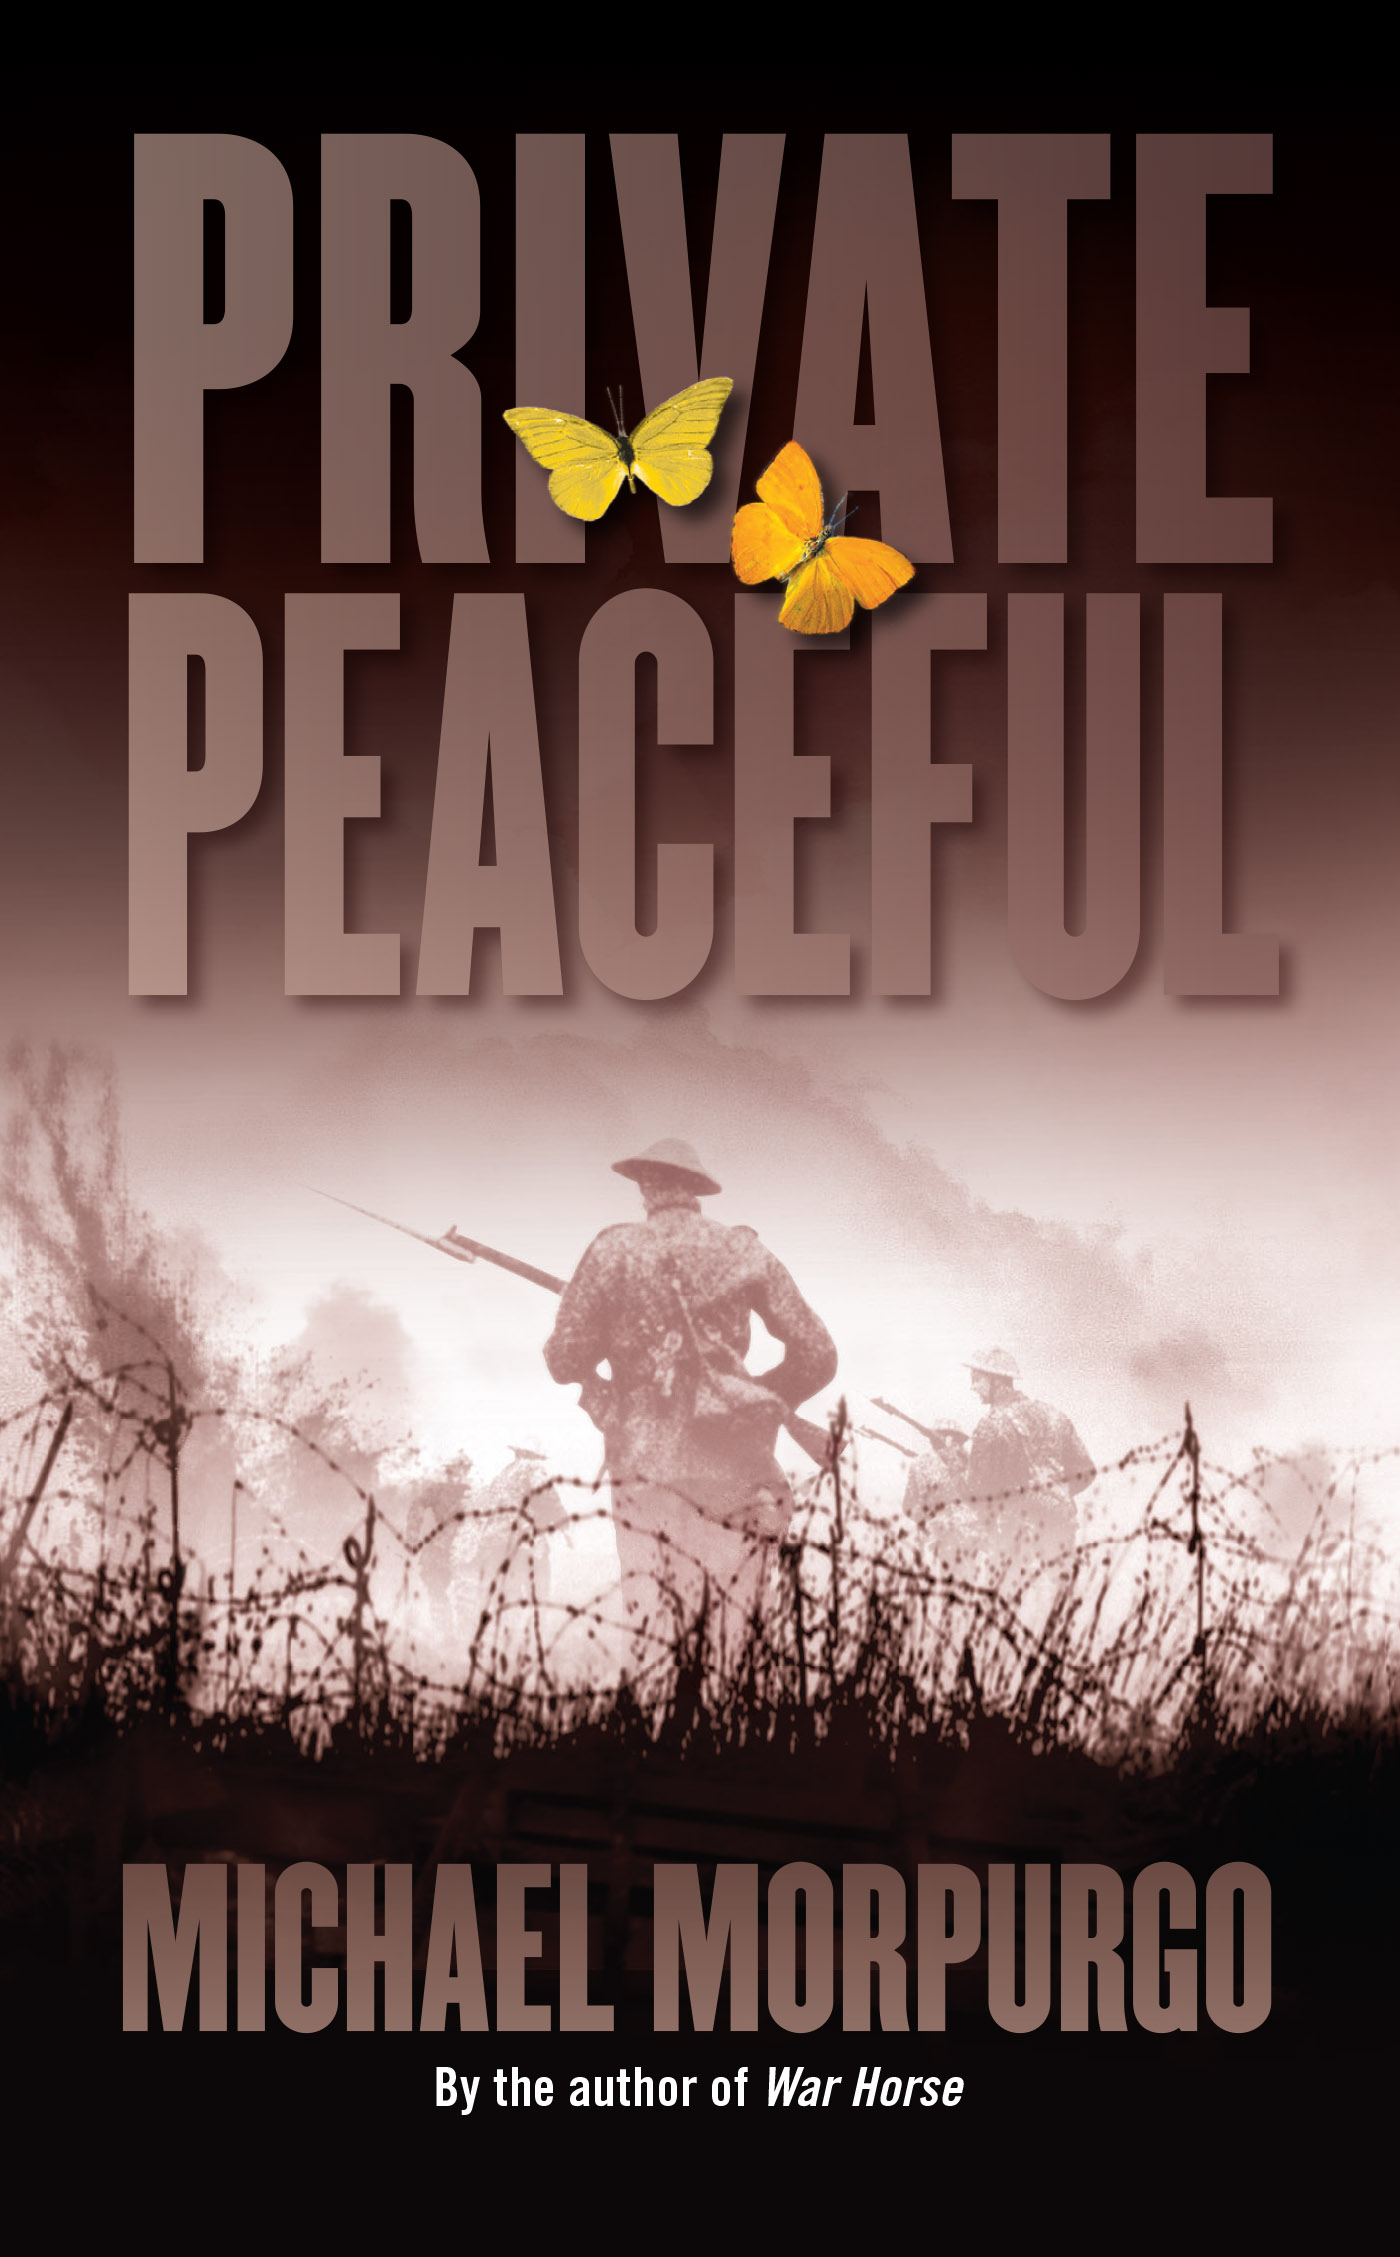 Private Peaceful cover image